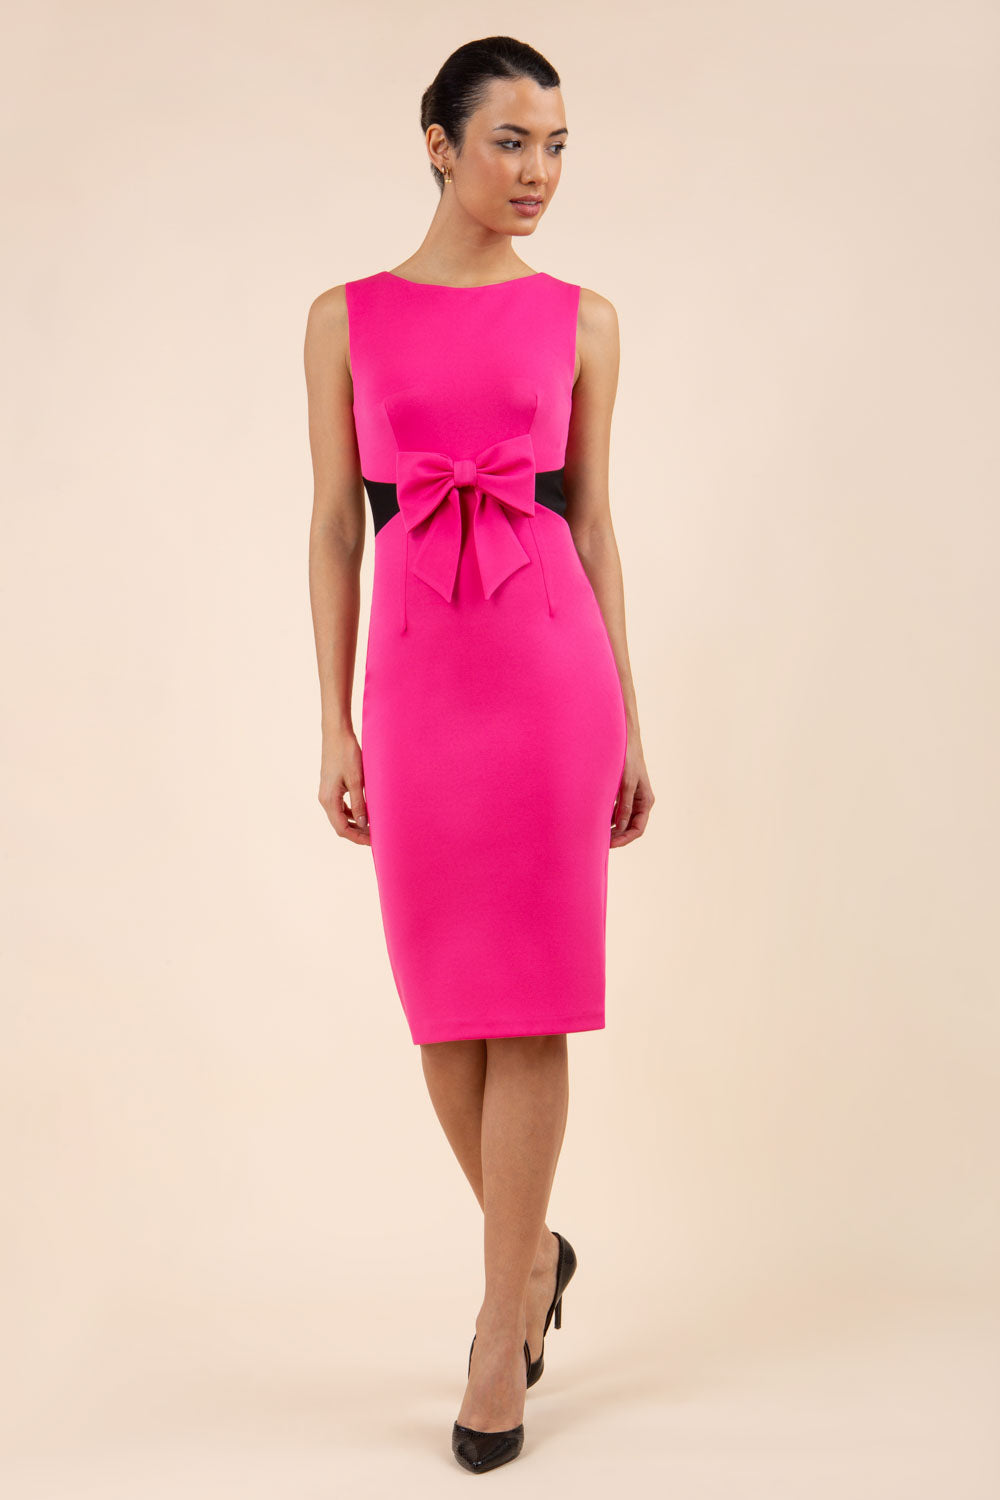 blonde model wearing Diva Catwalk Pencil sleeveless dress with rounded neckline and bow detail at the front with a contrasting black band in hibiscus pink front